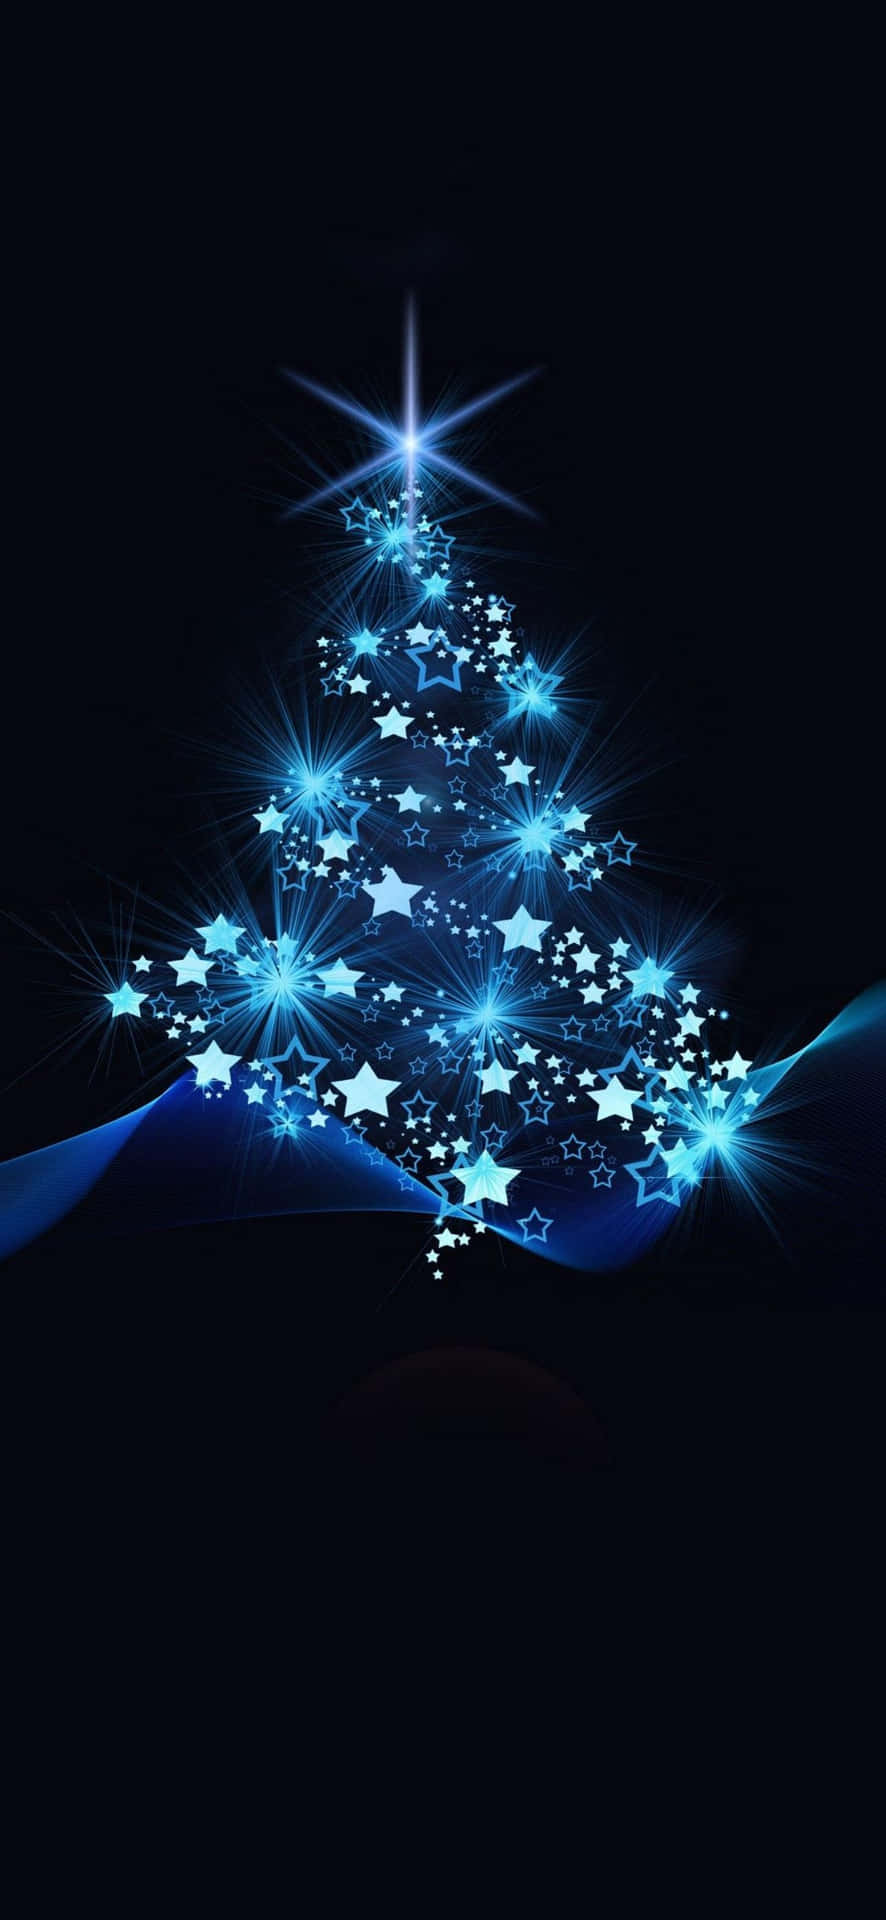 "A festive Christmas wallpaper for your iPhone!"